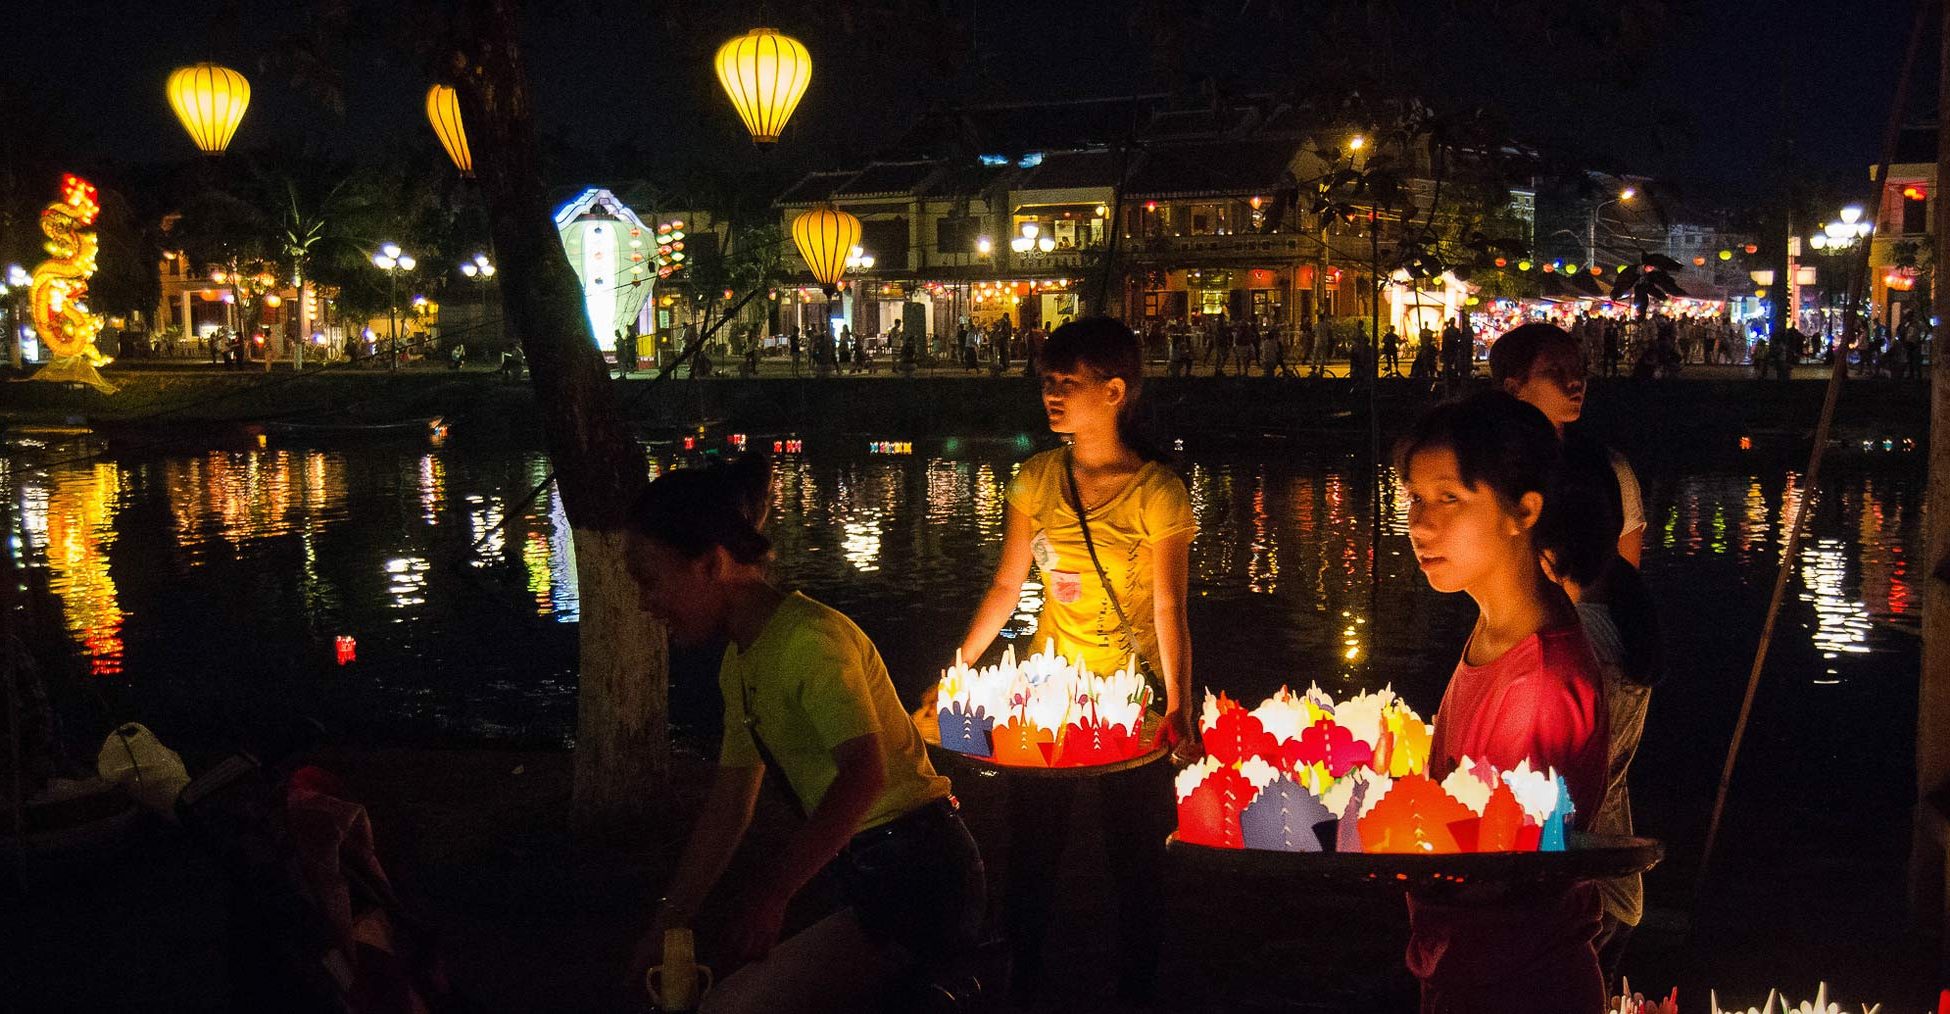 Girls selling papper lanterns in Hoi An